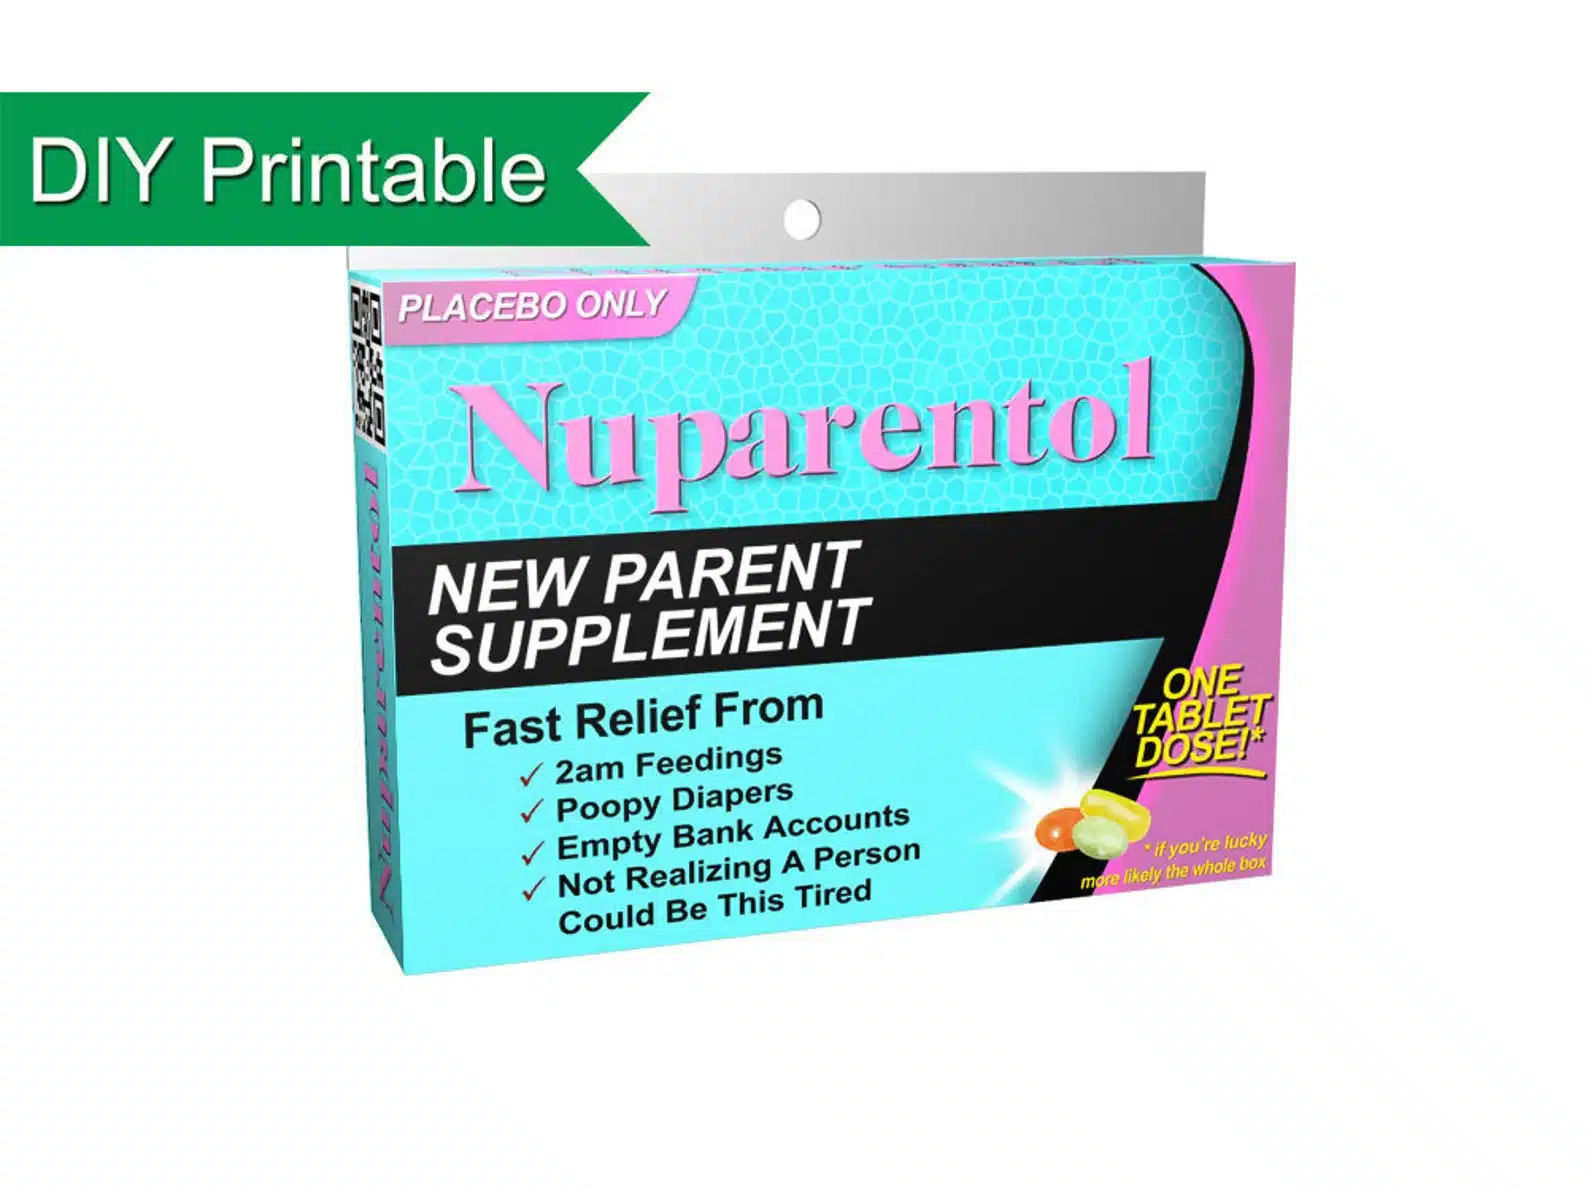 New Baby Gift: Nuparentol the New Parent